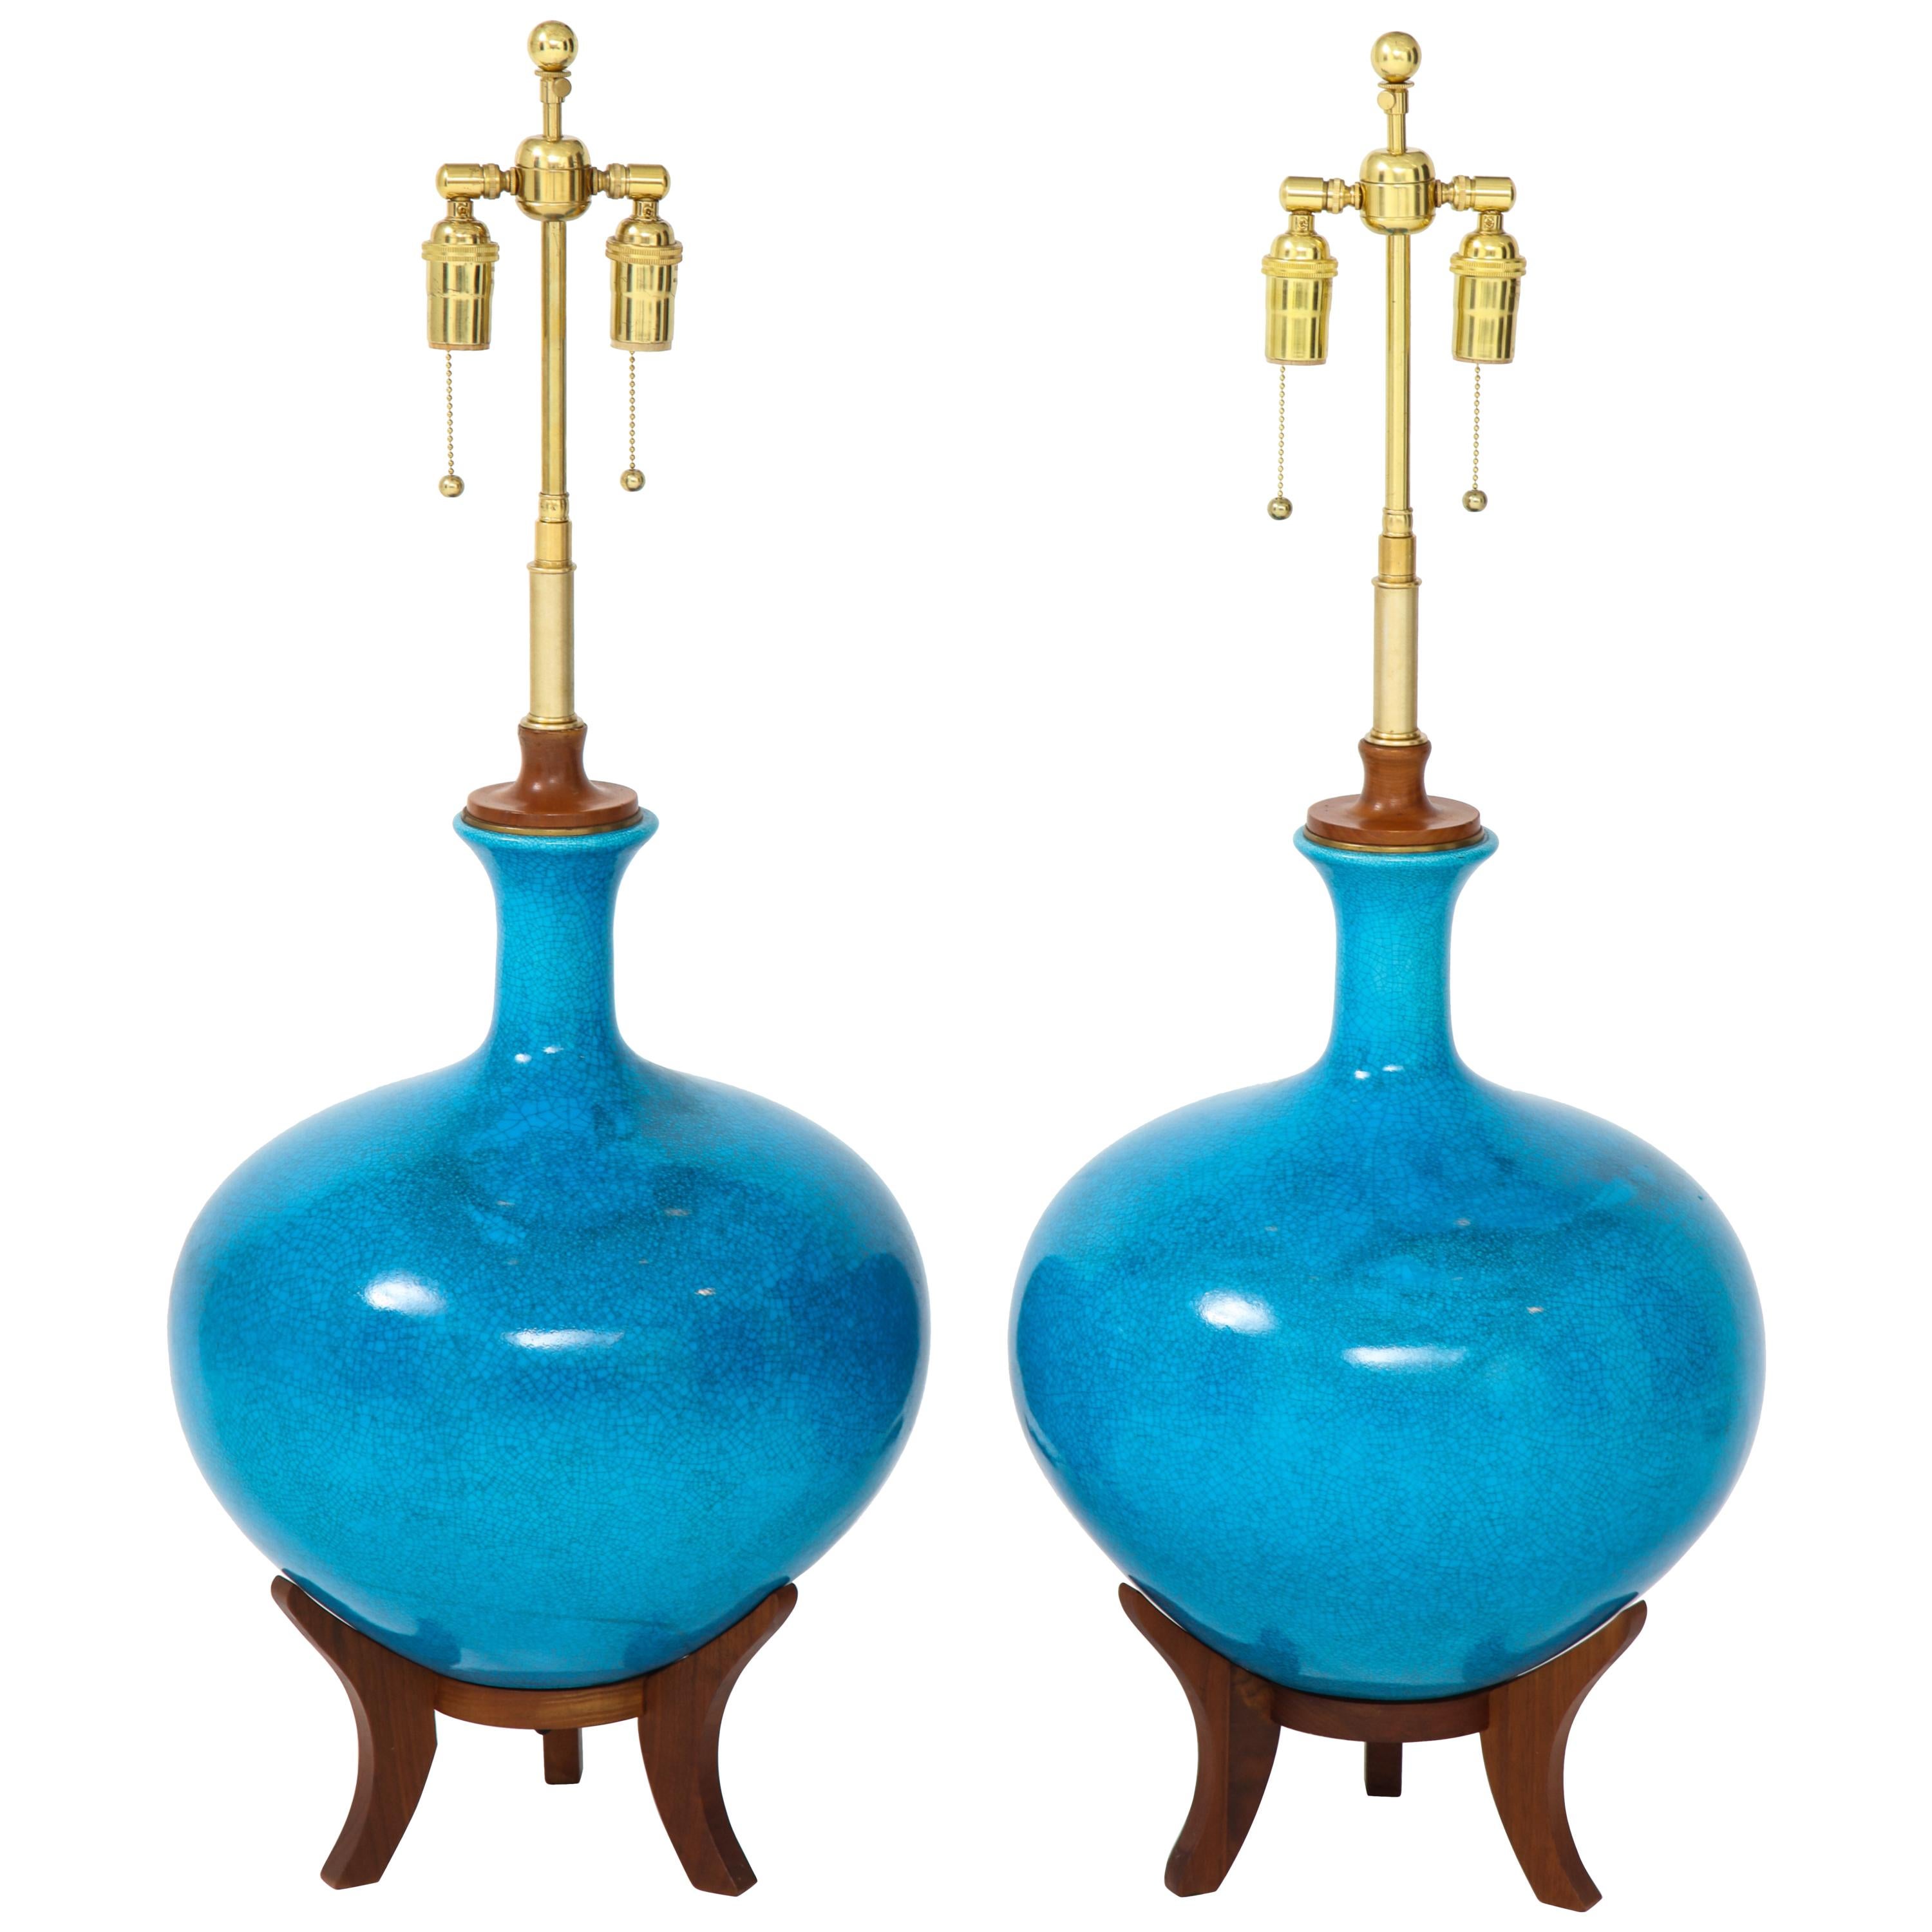 Fabulous Pair of Mid-Century Lamps with a Cerulean Blue Glazed Finish